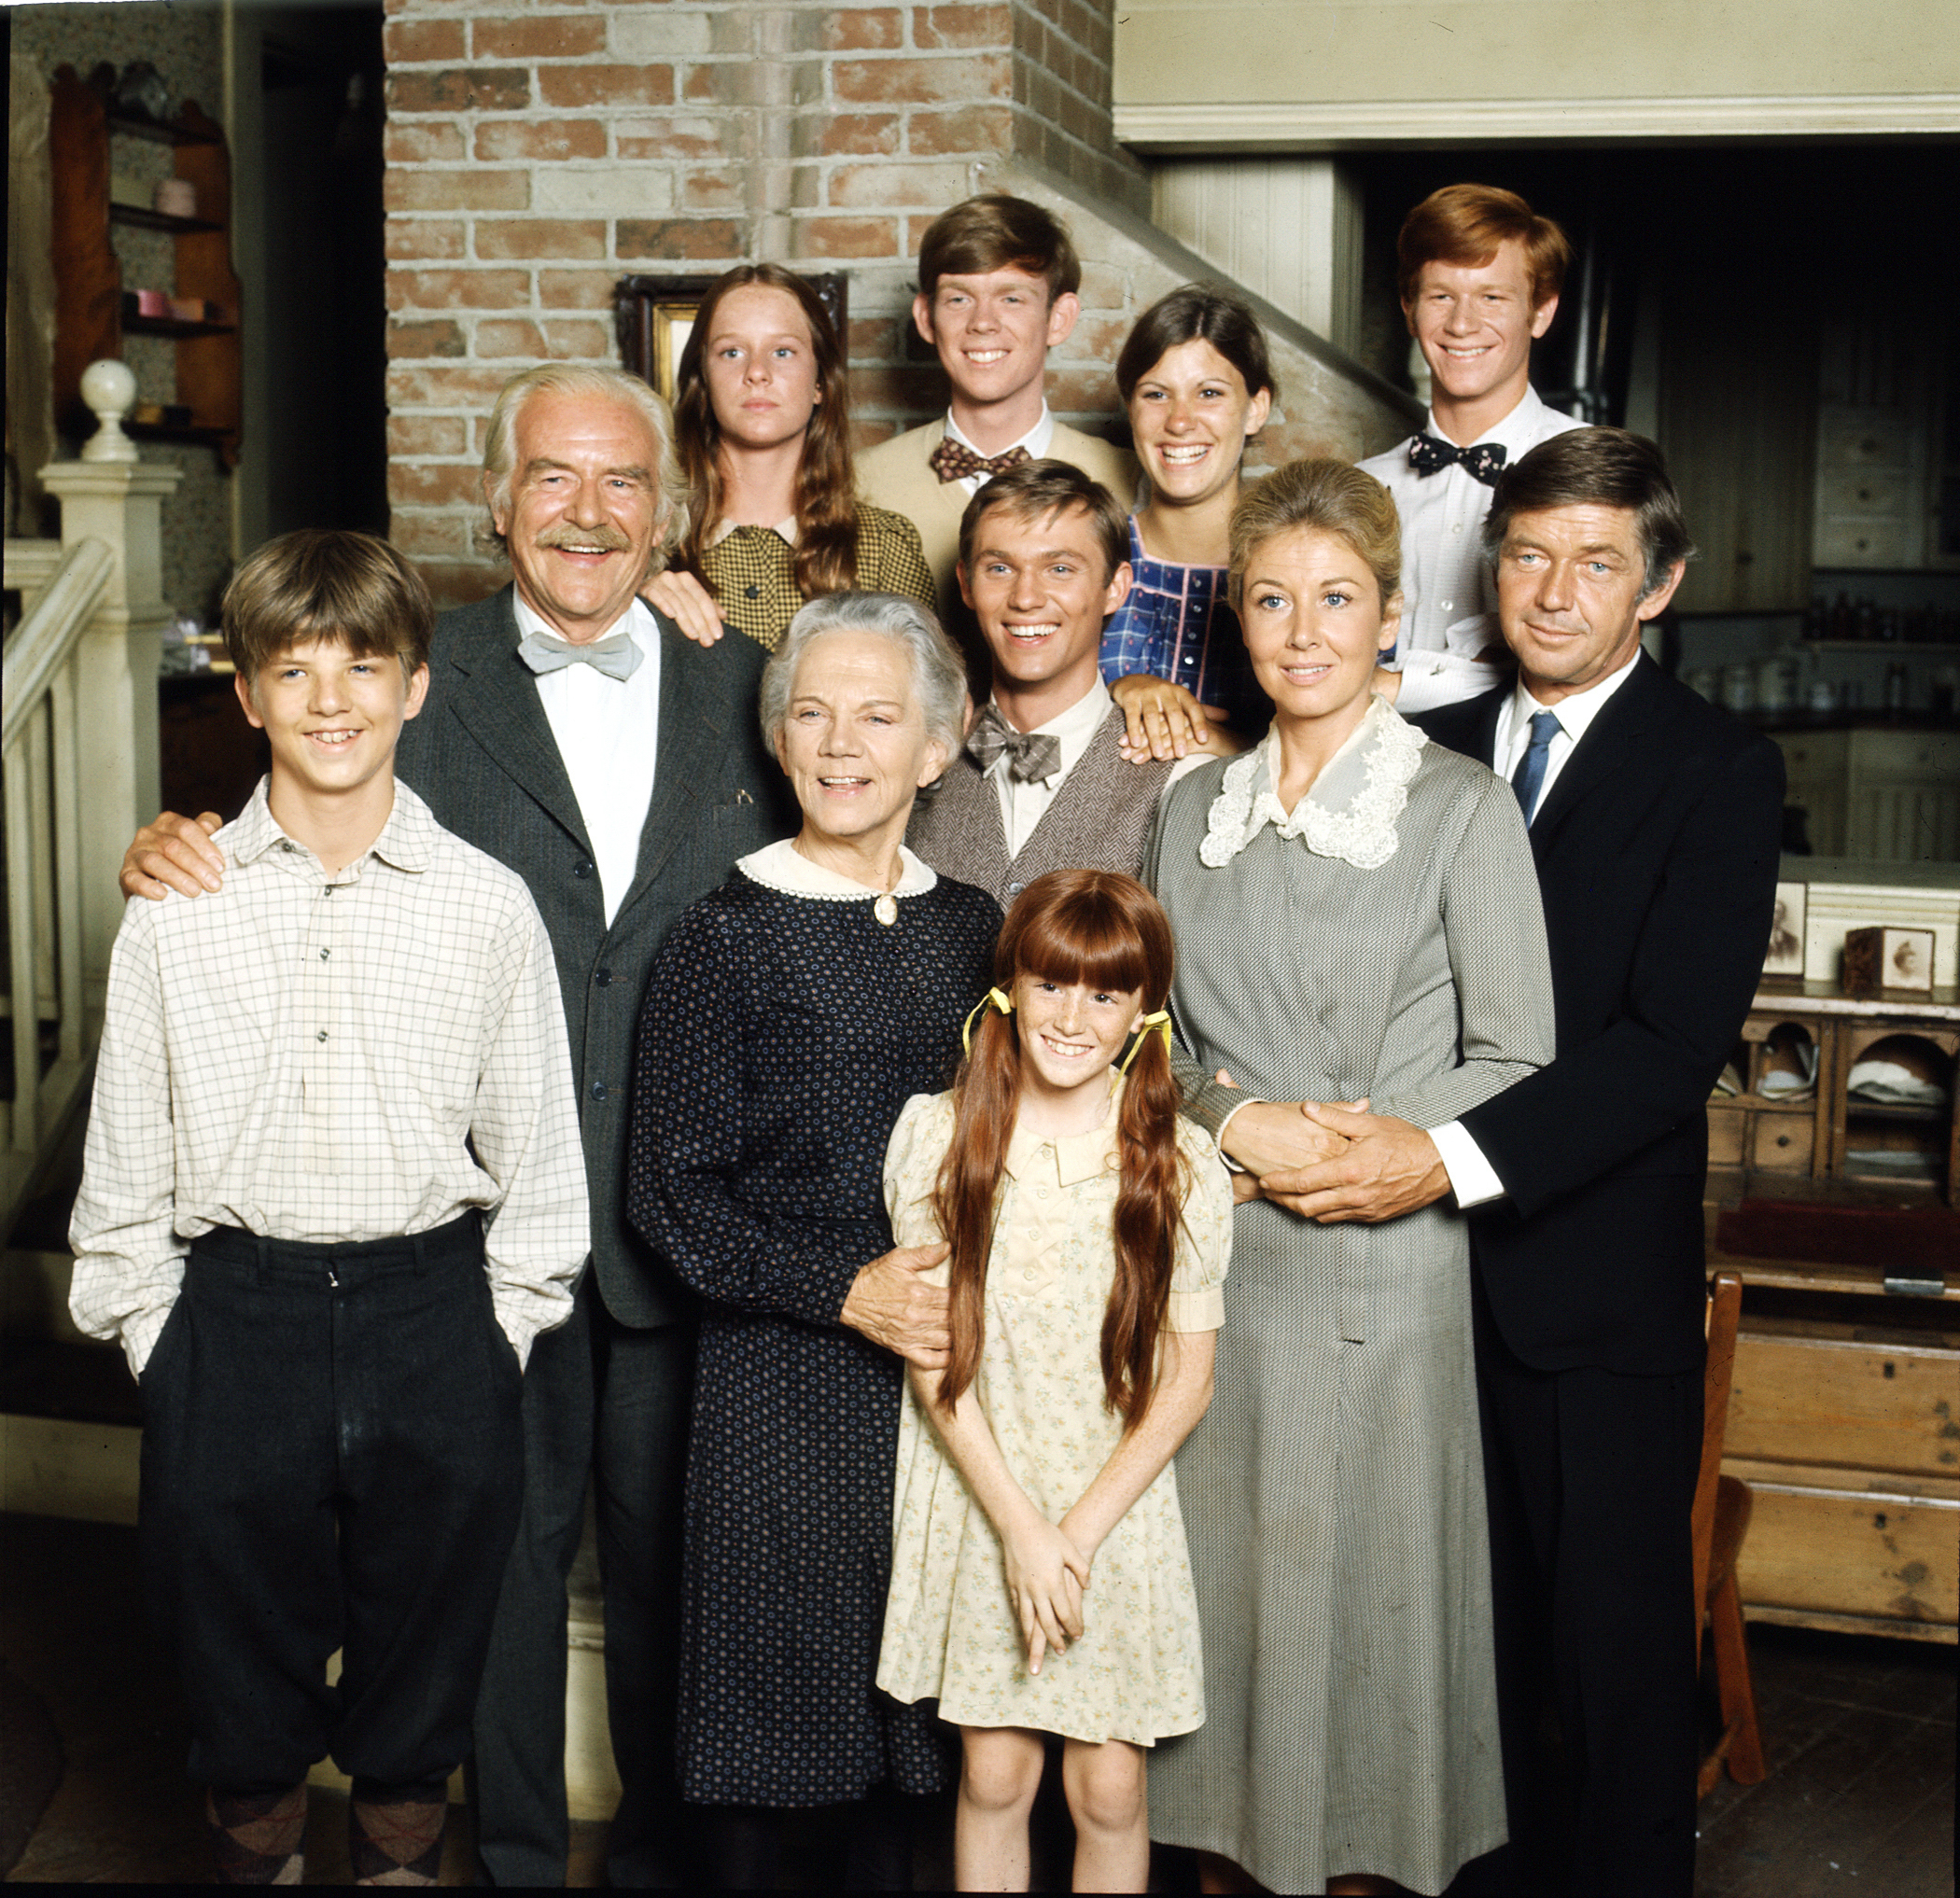 Mary McDonough, Jon Walmsley, Judy Norton, Eric Scott, Will Geer, Richard Thomas, Michael Learned, Ralph Waite, David Harper, Ellen Corby, and Kami Cotler as their characters from "The Waltons" in Los Angeles, 1977. | Source: Getty Images